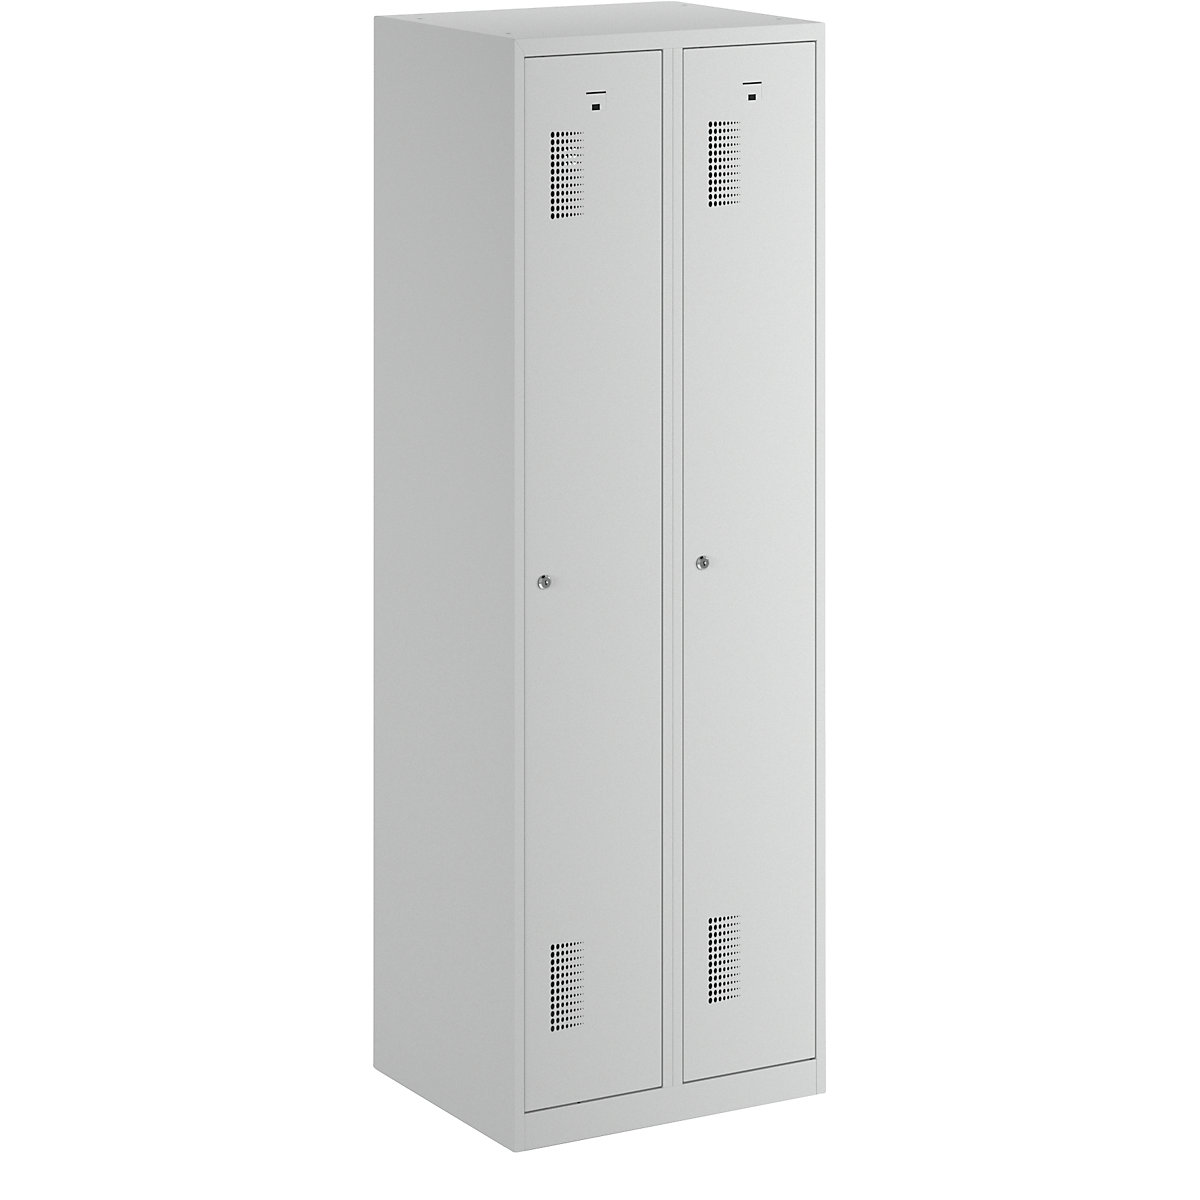 AMSTERDAM cloakroom locker – eurokraft basic, height 1800 mm, width 600 mm, 2 x 298 mm wide compartments, with cylinder lock, completely light grey-21